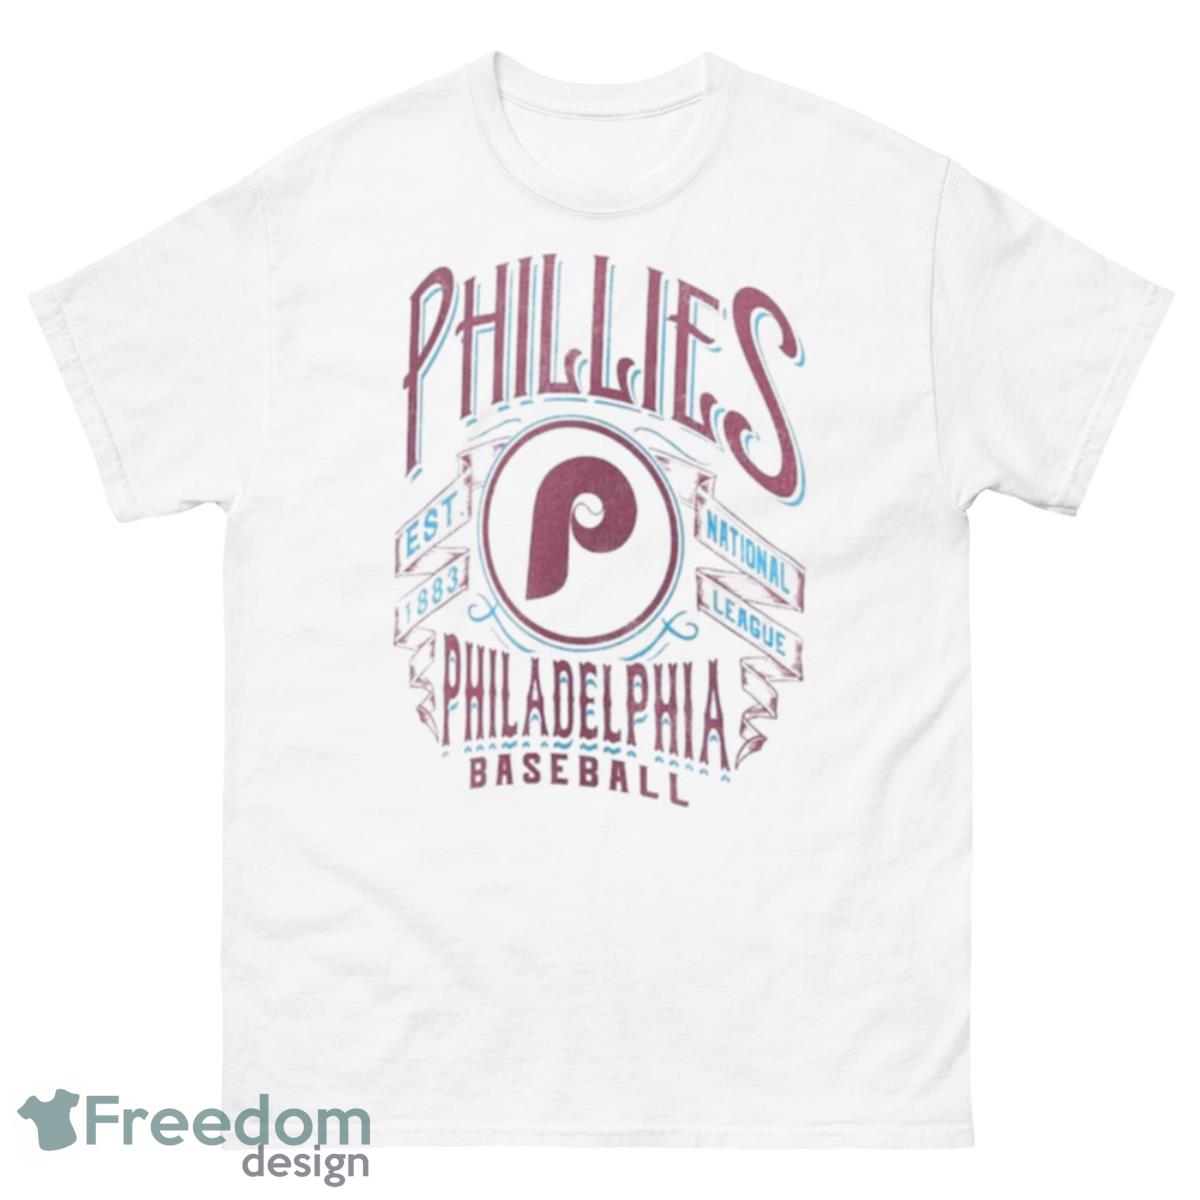 Pink Philadelphia Phillies Infant Jersey (24M Only)